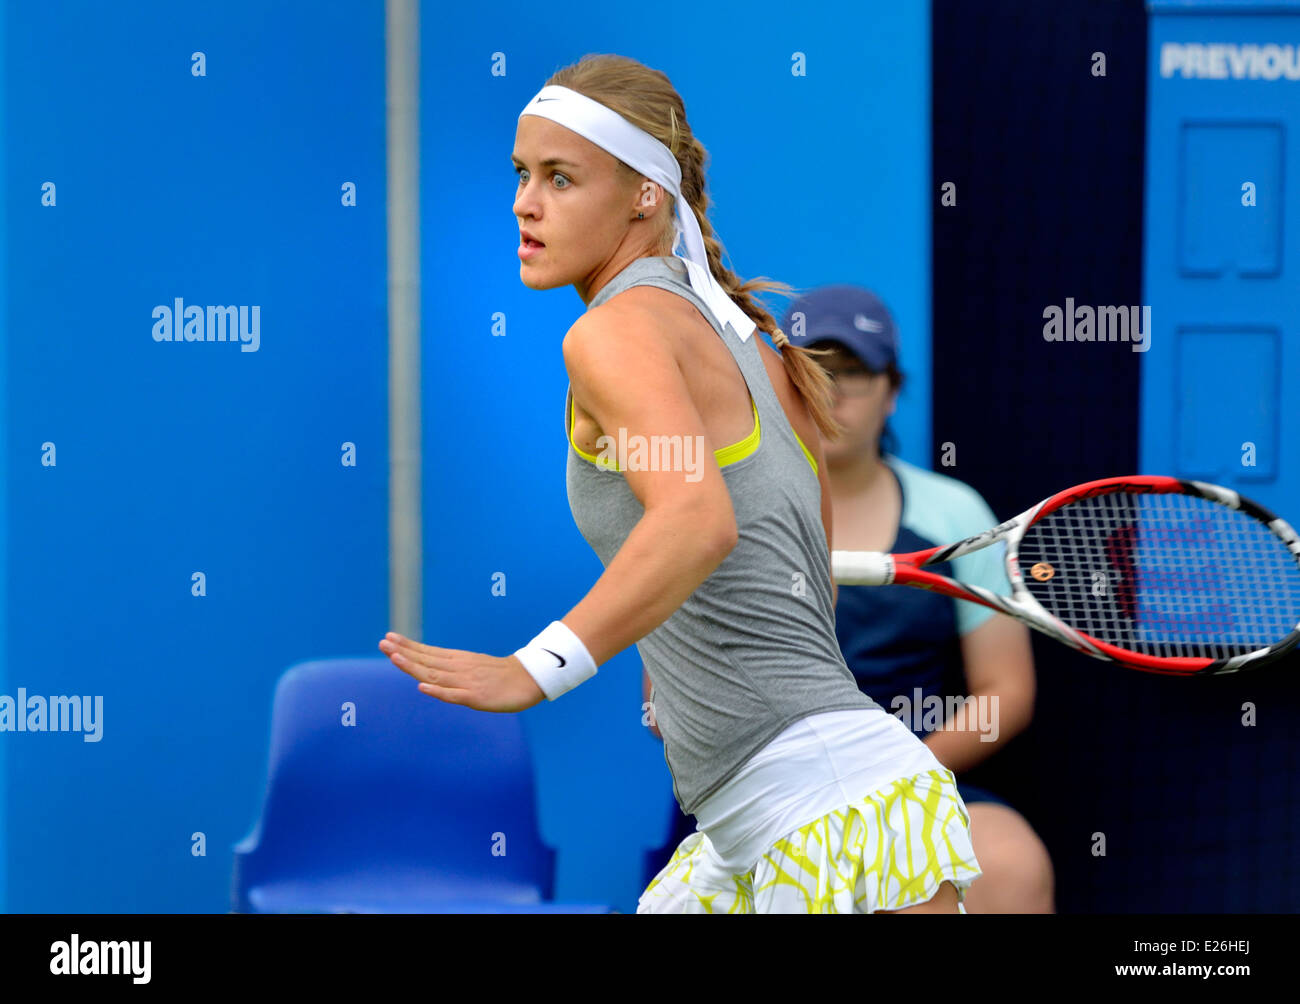 Slovakian Tennis Player High Resolution Stock Photography and Images - Alamy